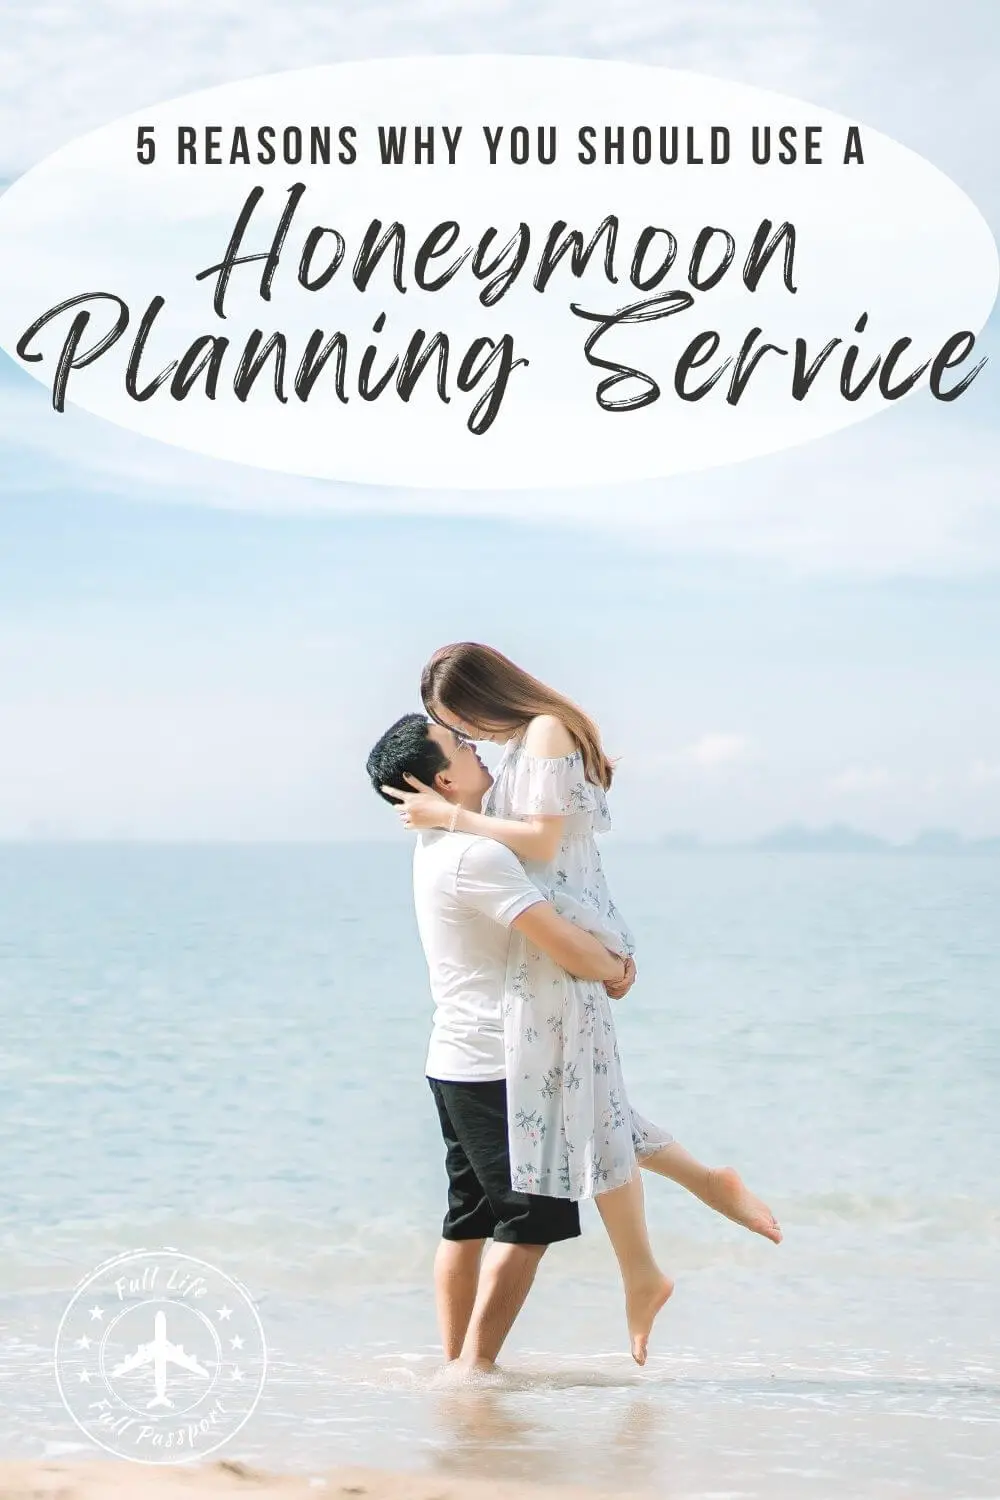 5 Reasons Why You Should Use a Honeymoon Planning Service